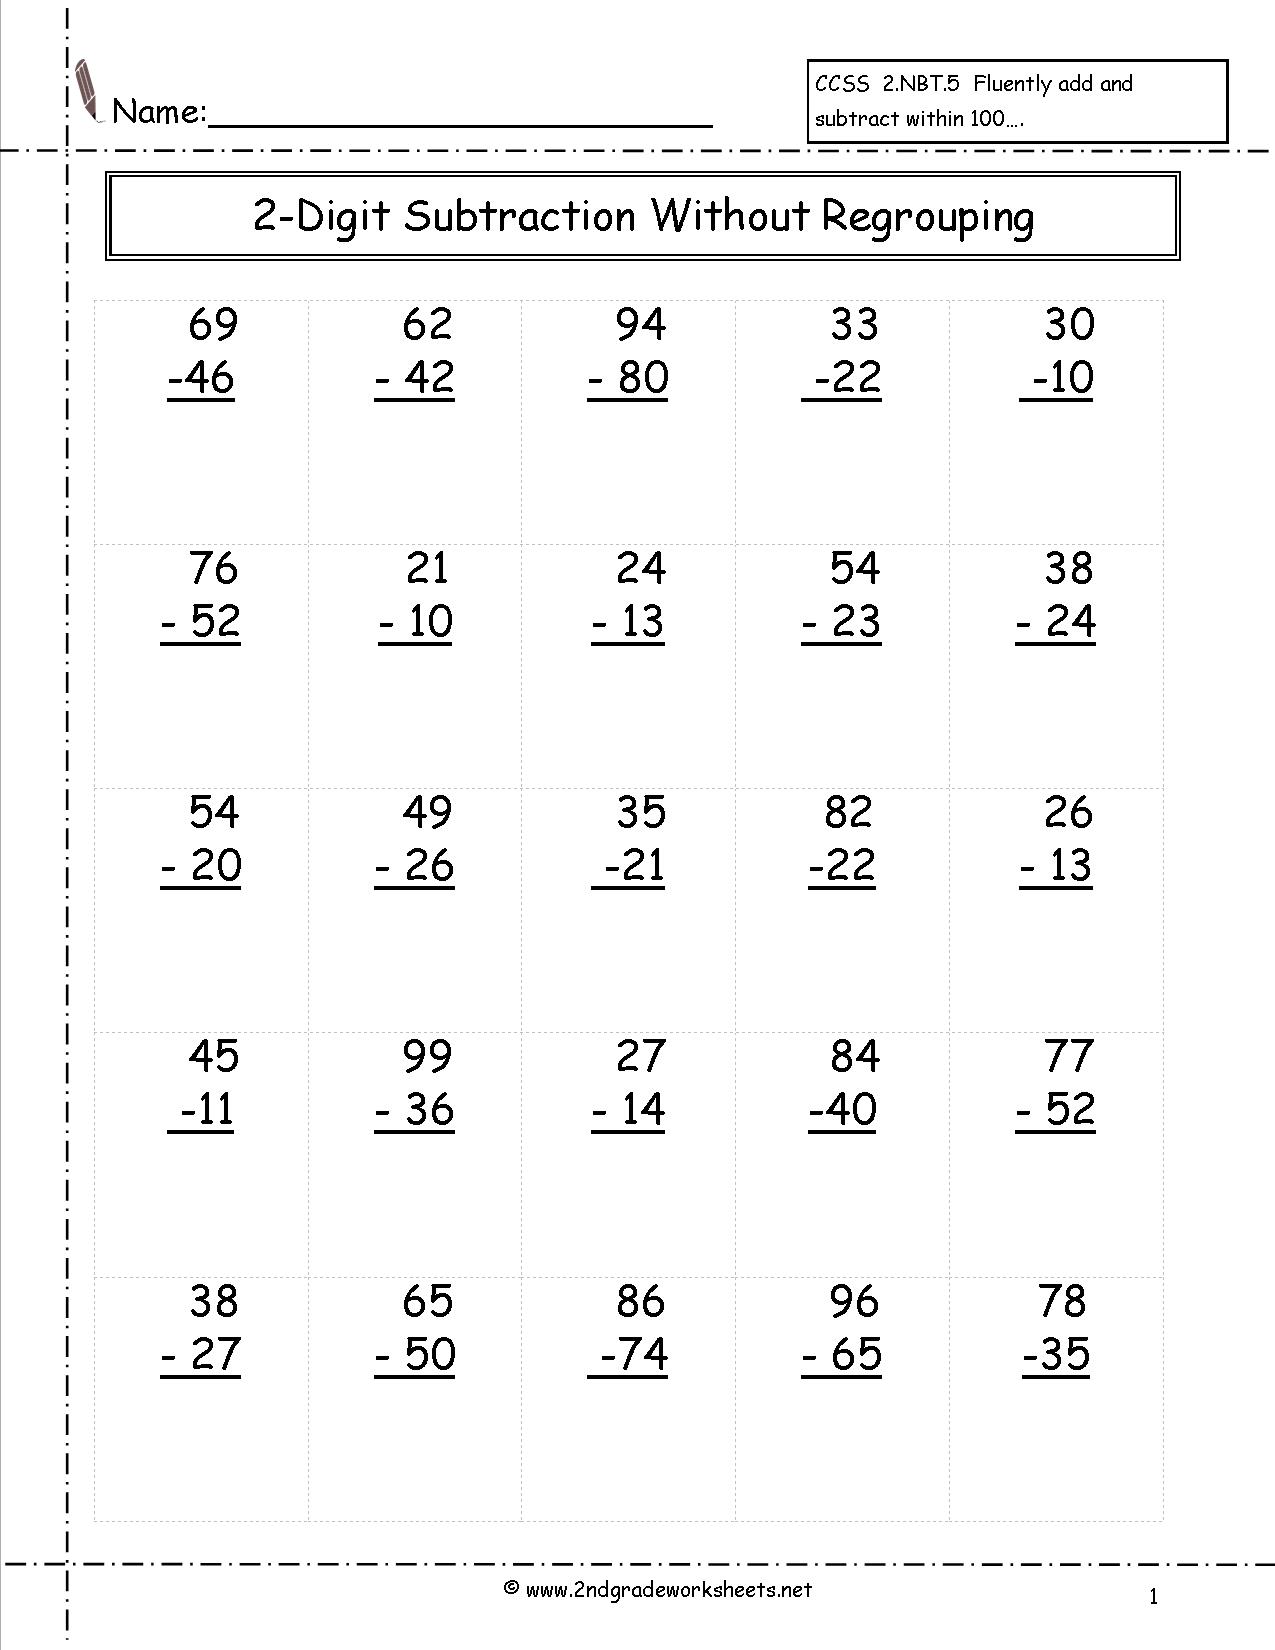 Two-Digit Subtraction with Regrouping Worksheets Image